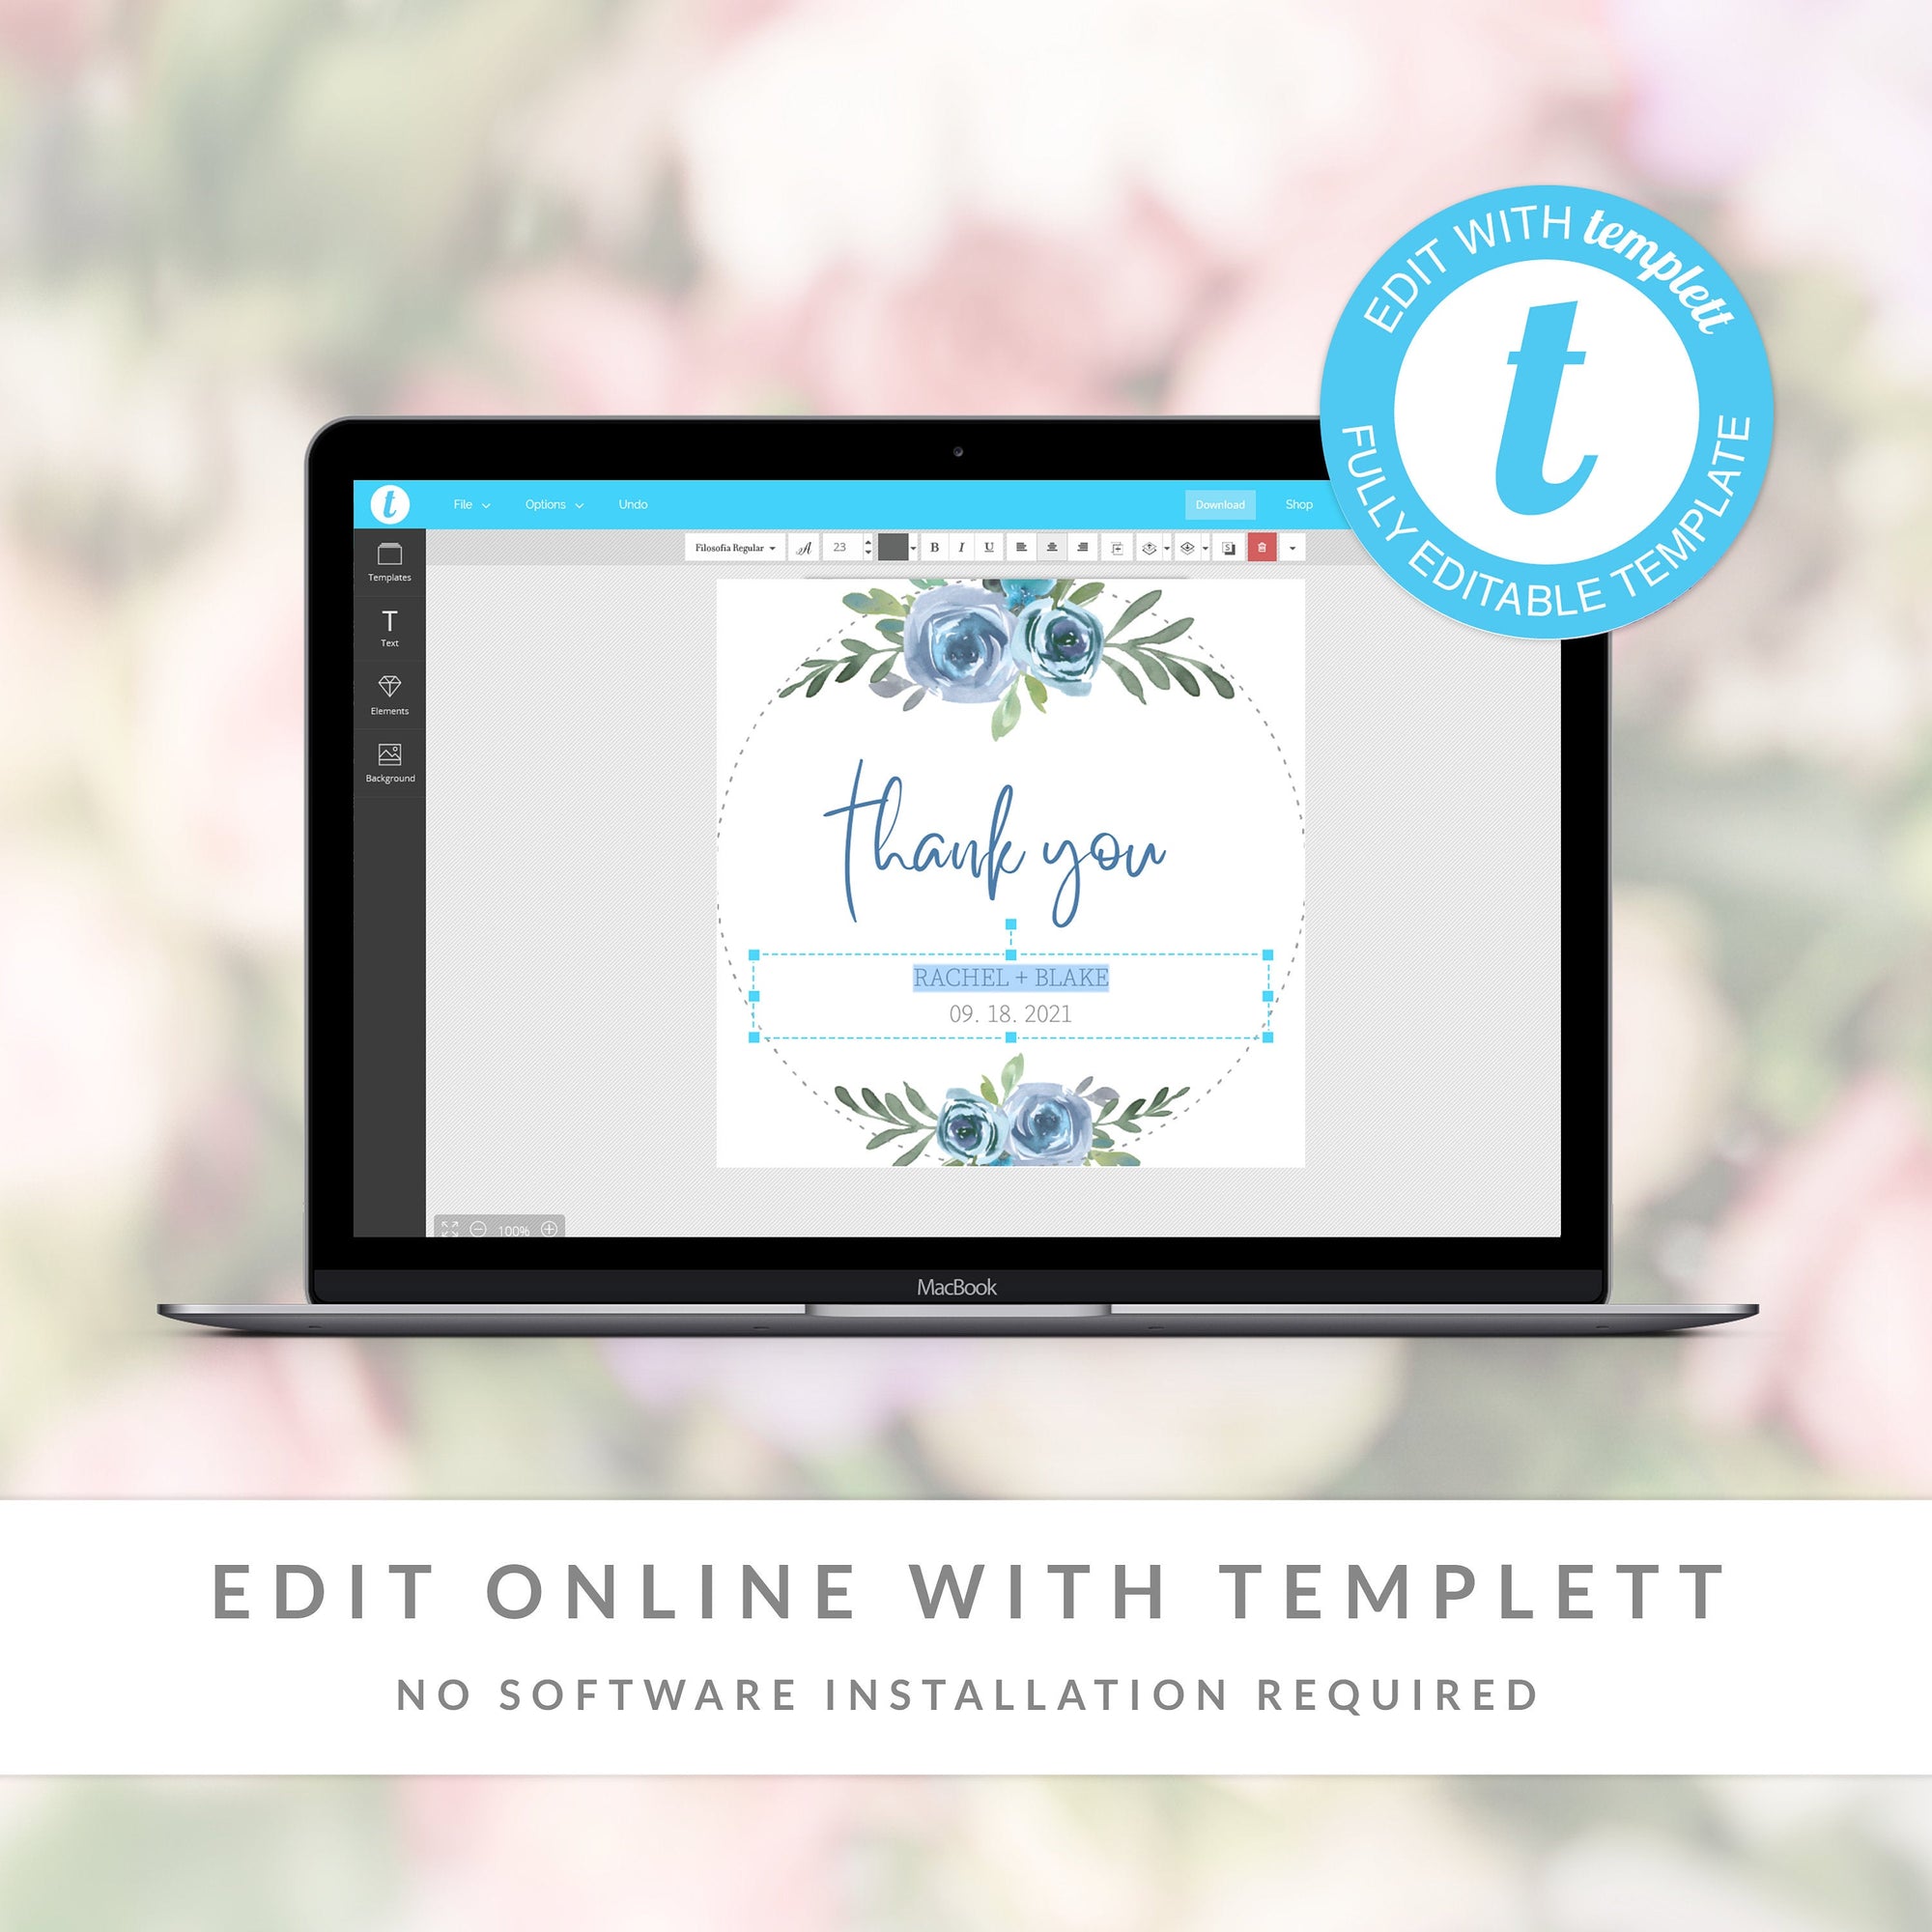 Printable Wedding Stickers Template, Blue Floral Wedding, Thank You Stickers Wedding, Personalised Stickers Wedding, DIGITAL DOWNLOAD BF100